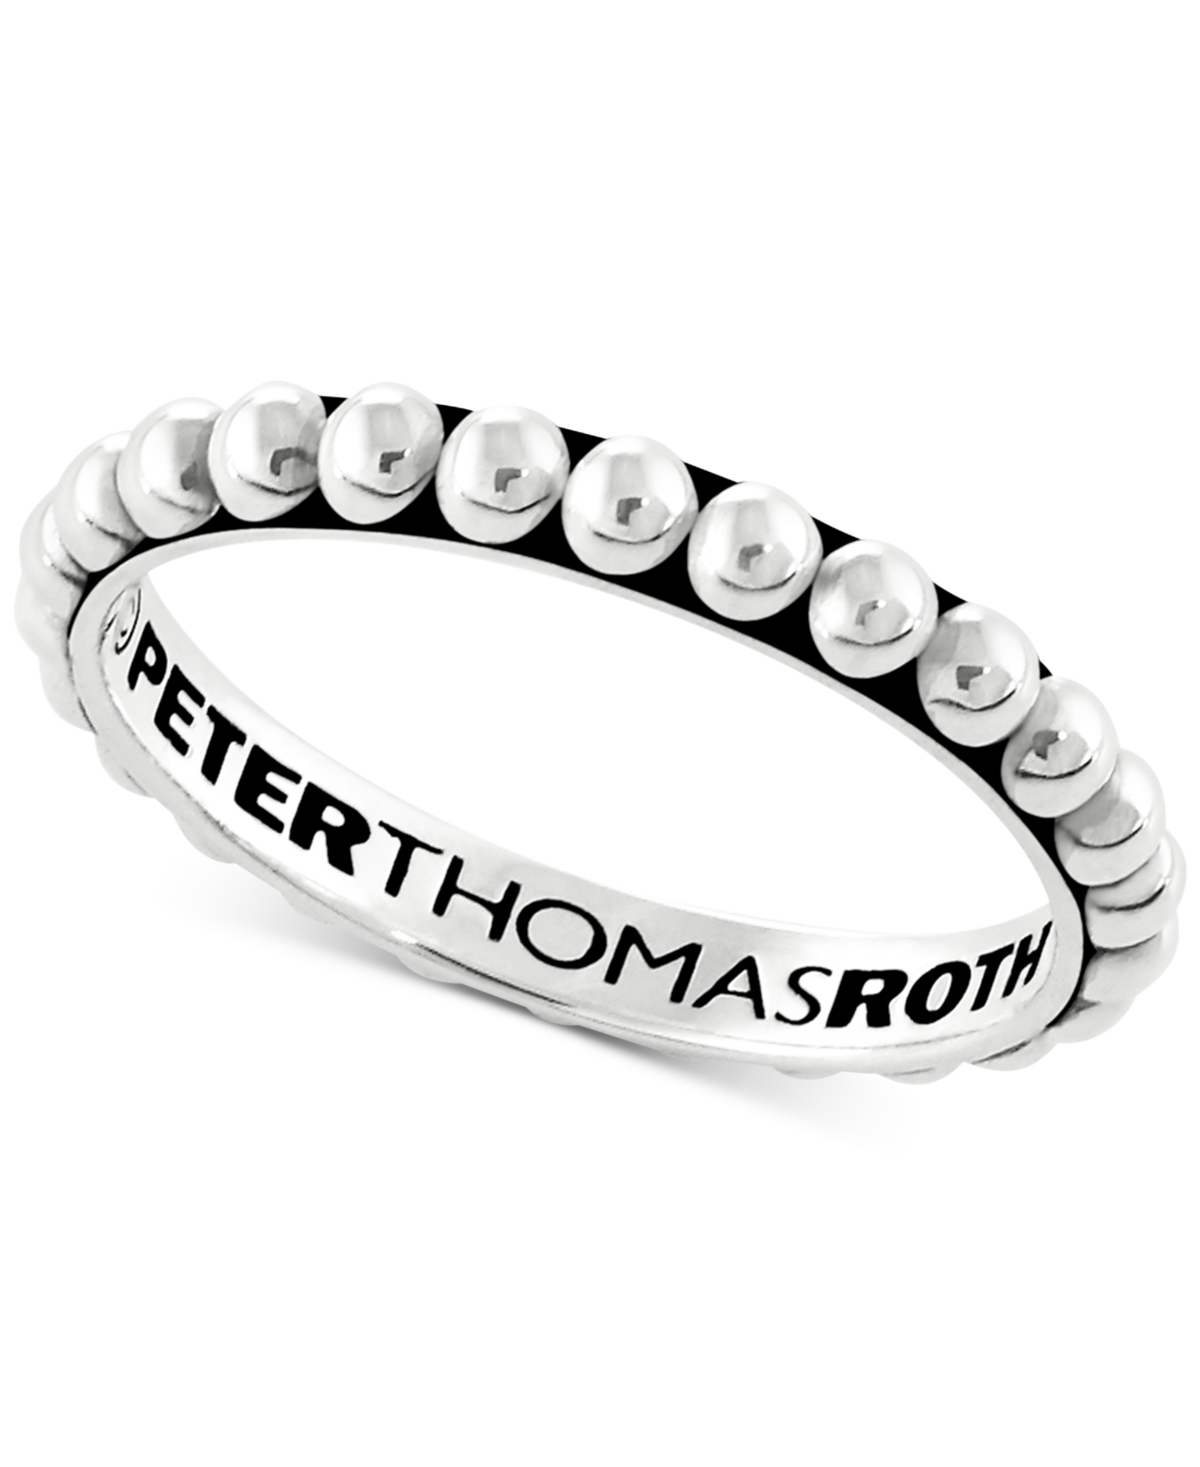 Peter Thomas Beaded Stacking Band in Sterling Silver - Silver